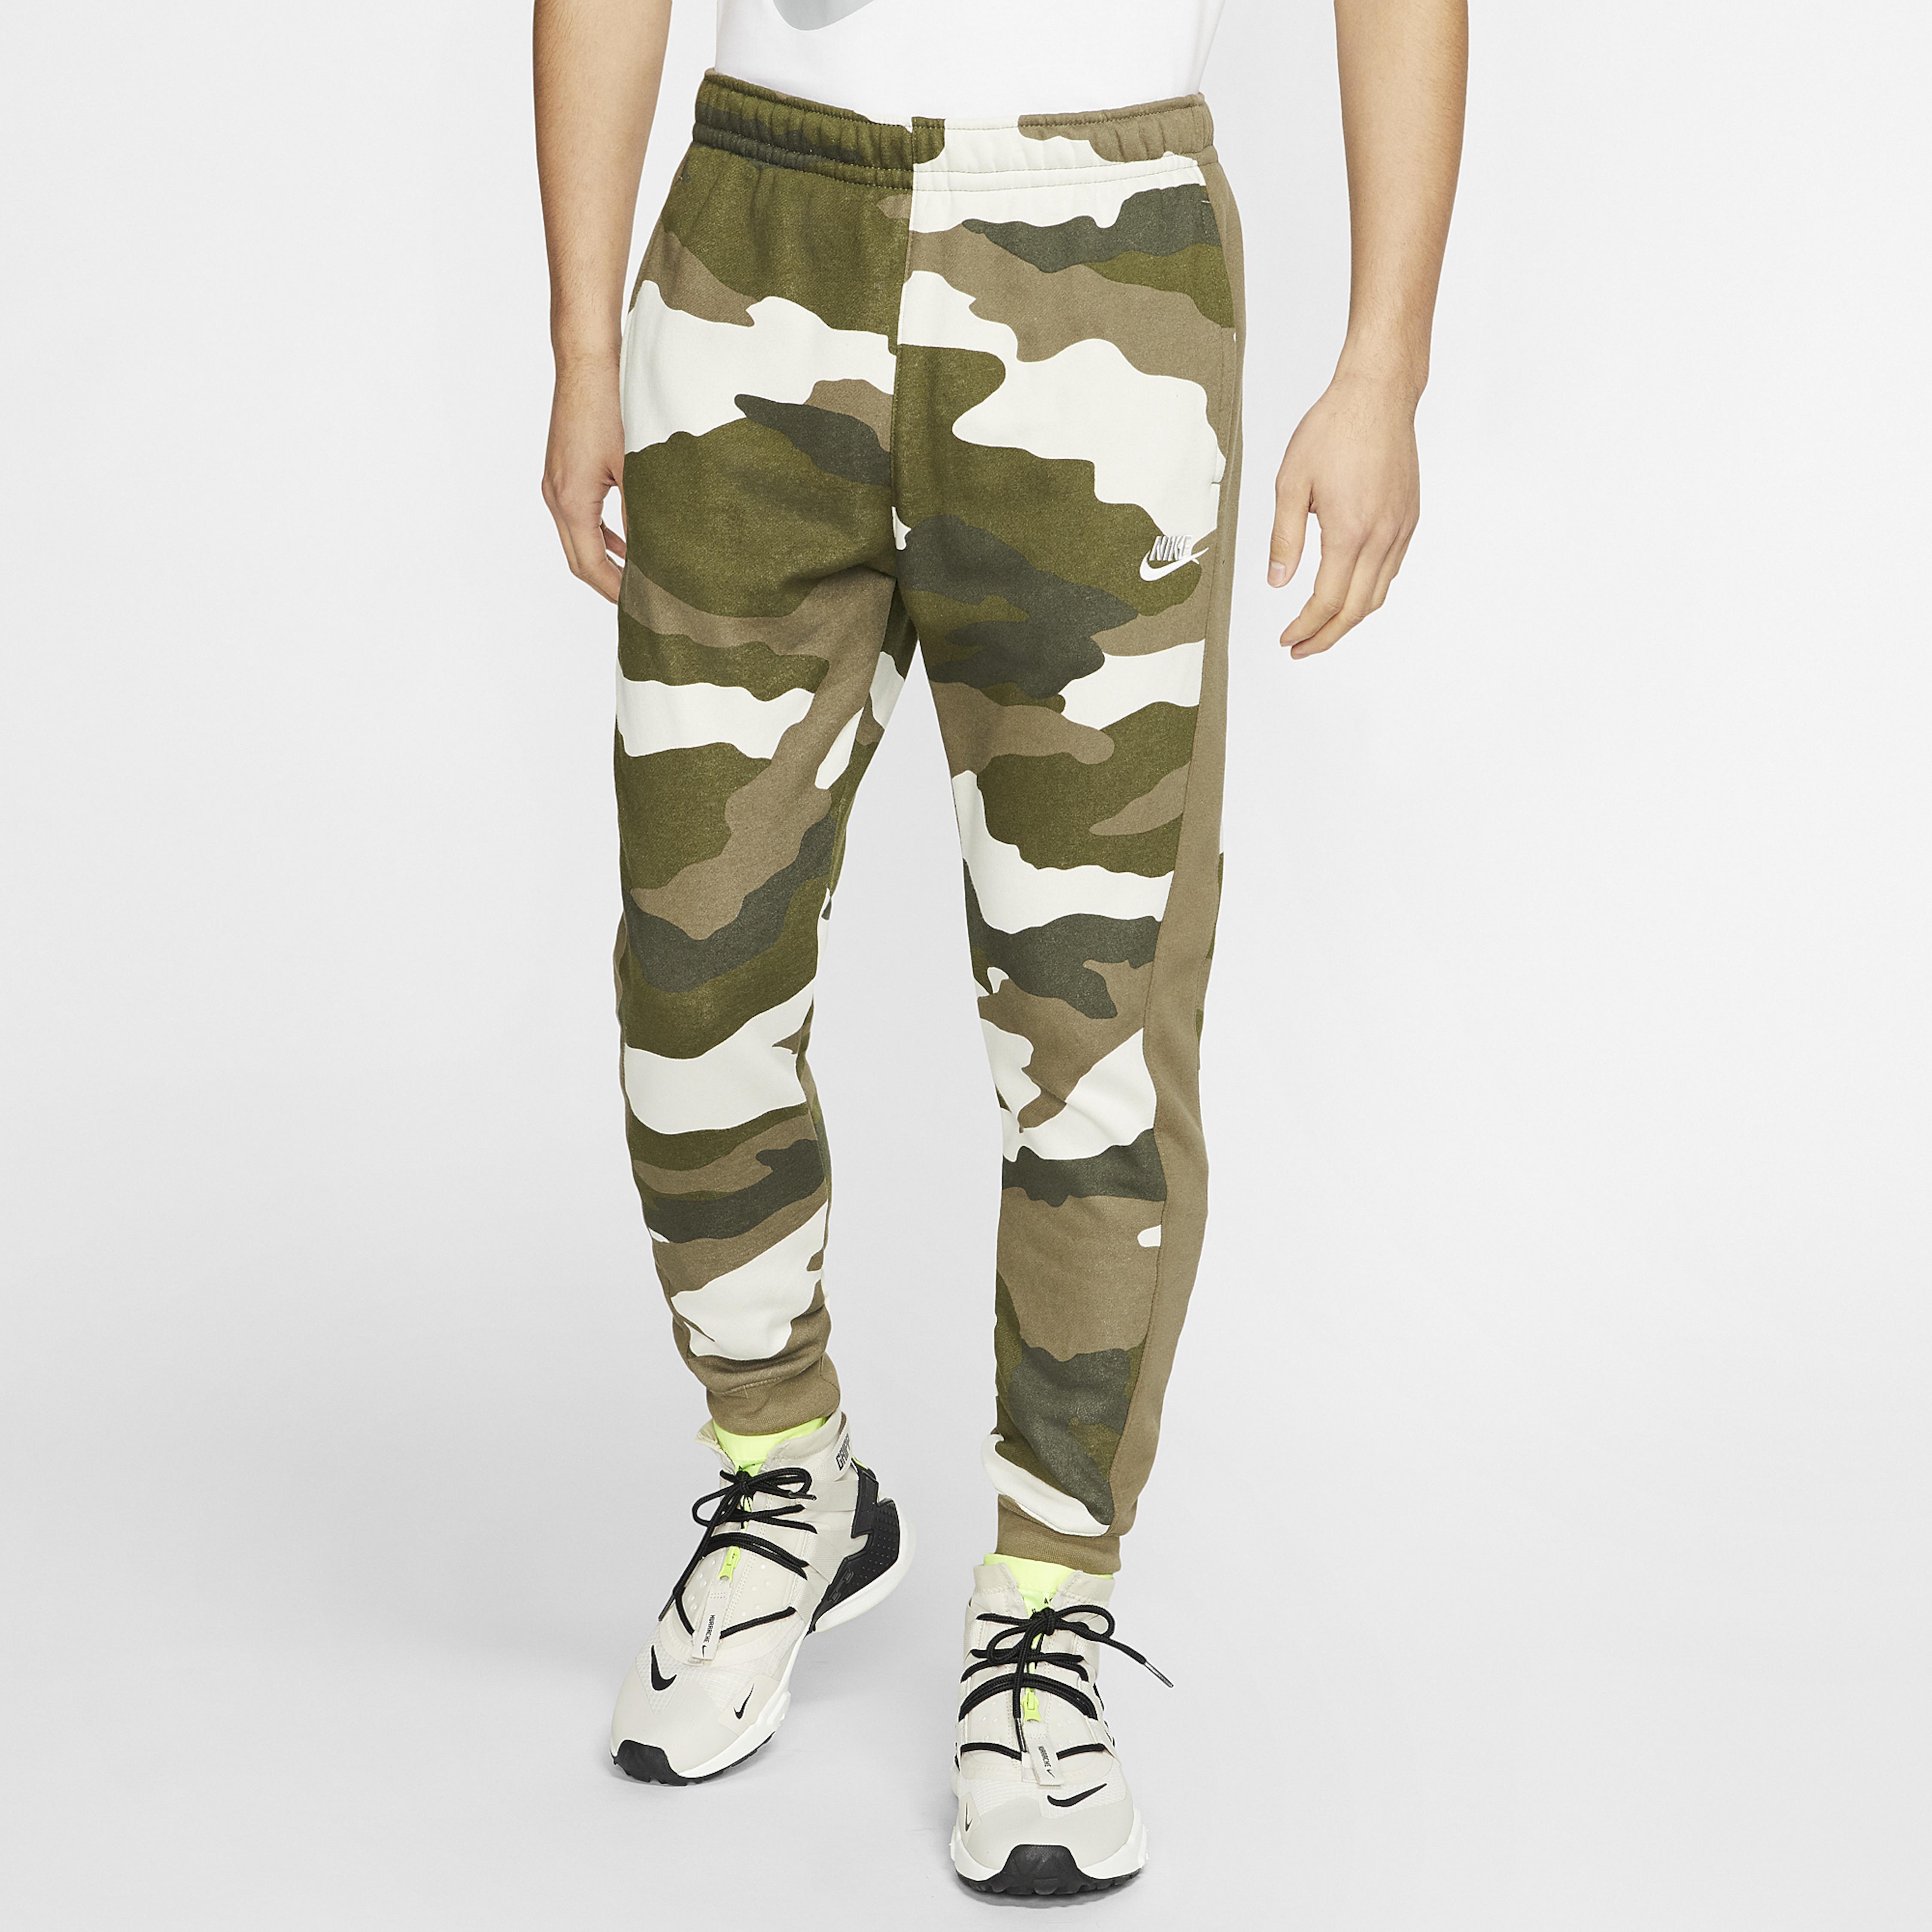 Nike Cotton Club Camo Joggers in Green for Men - Lyst